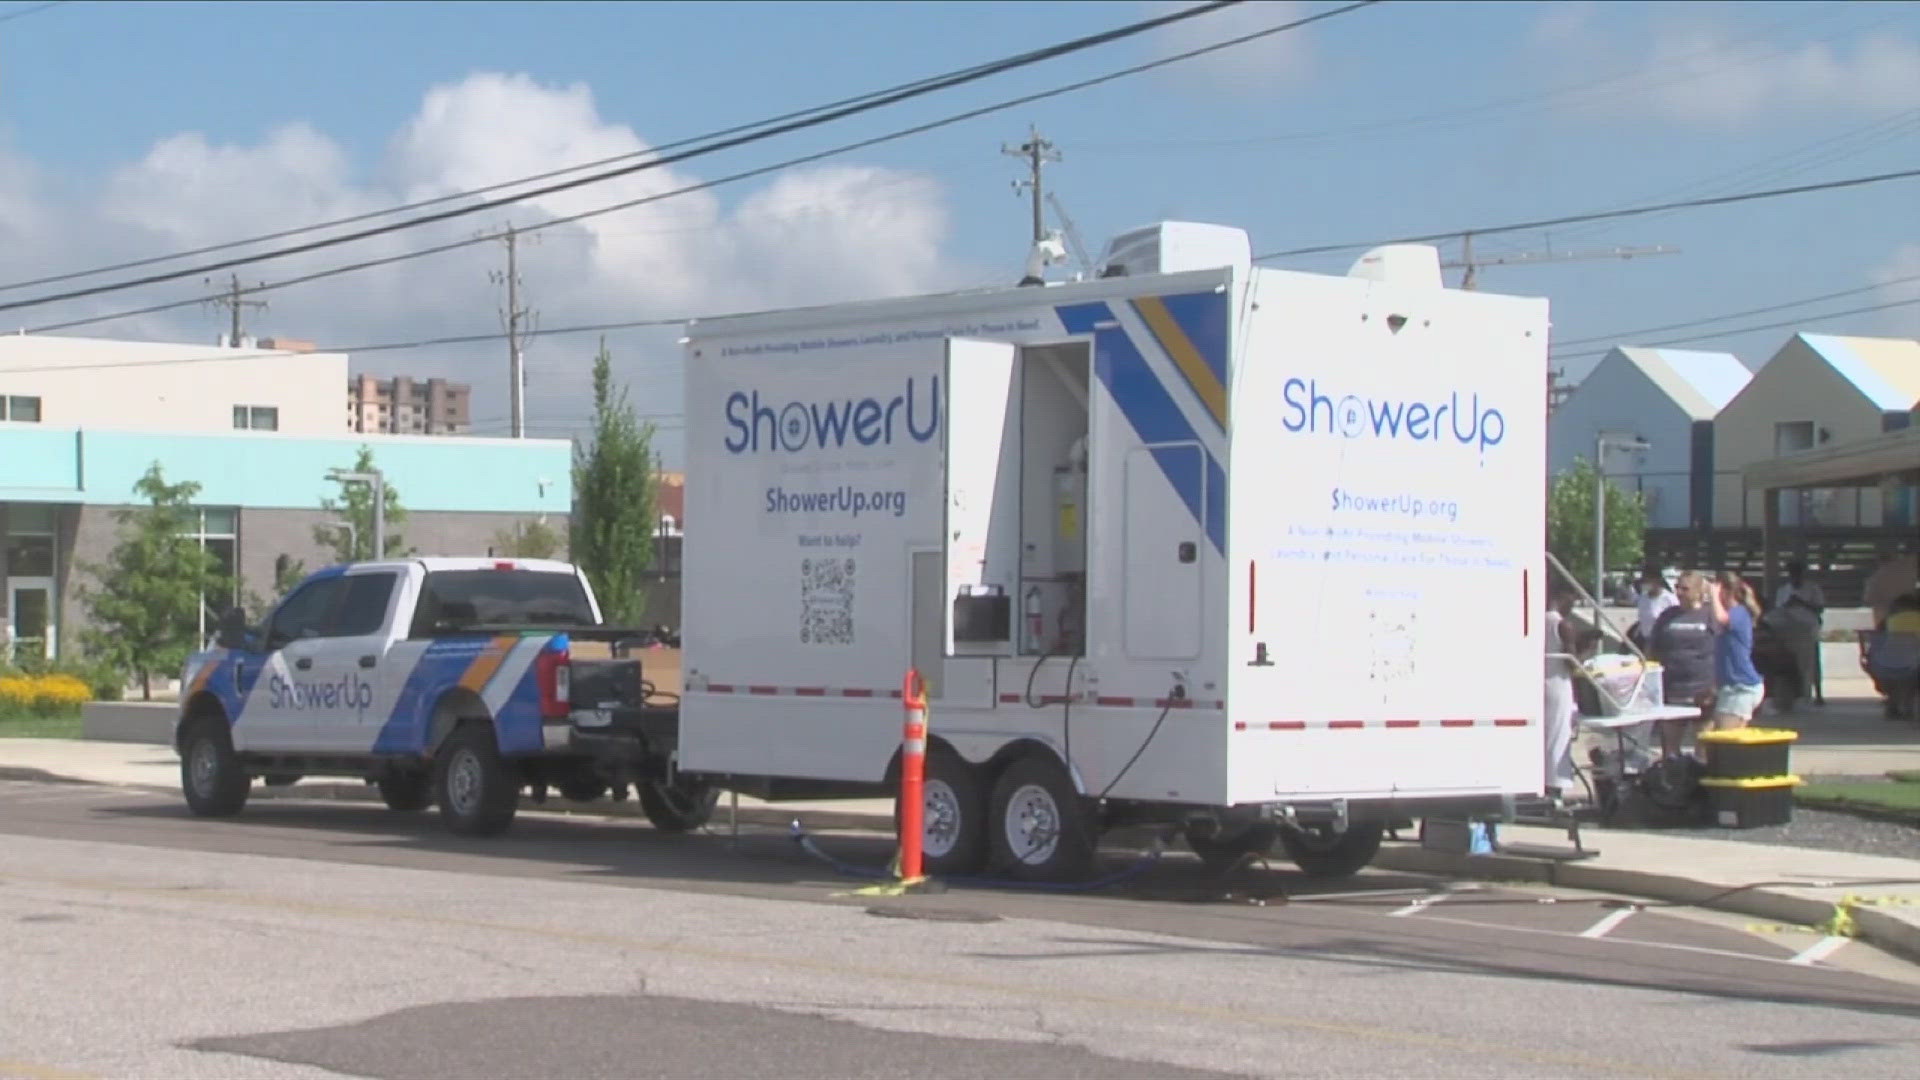 The organization offers AC spaces, mobile shower units, and other resources to those in need.